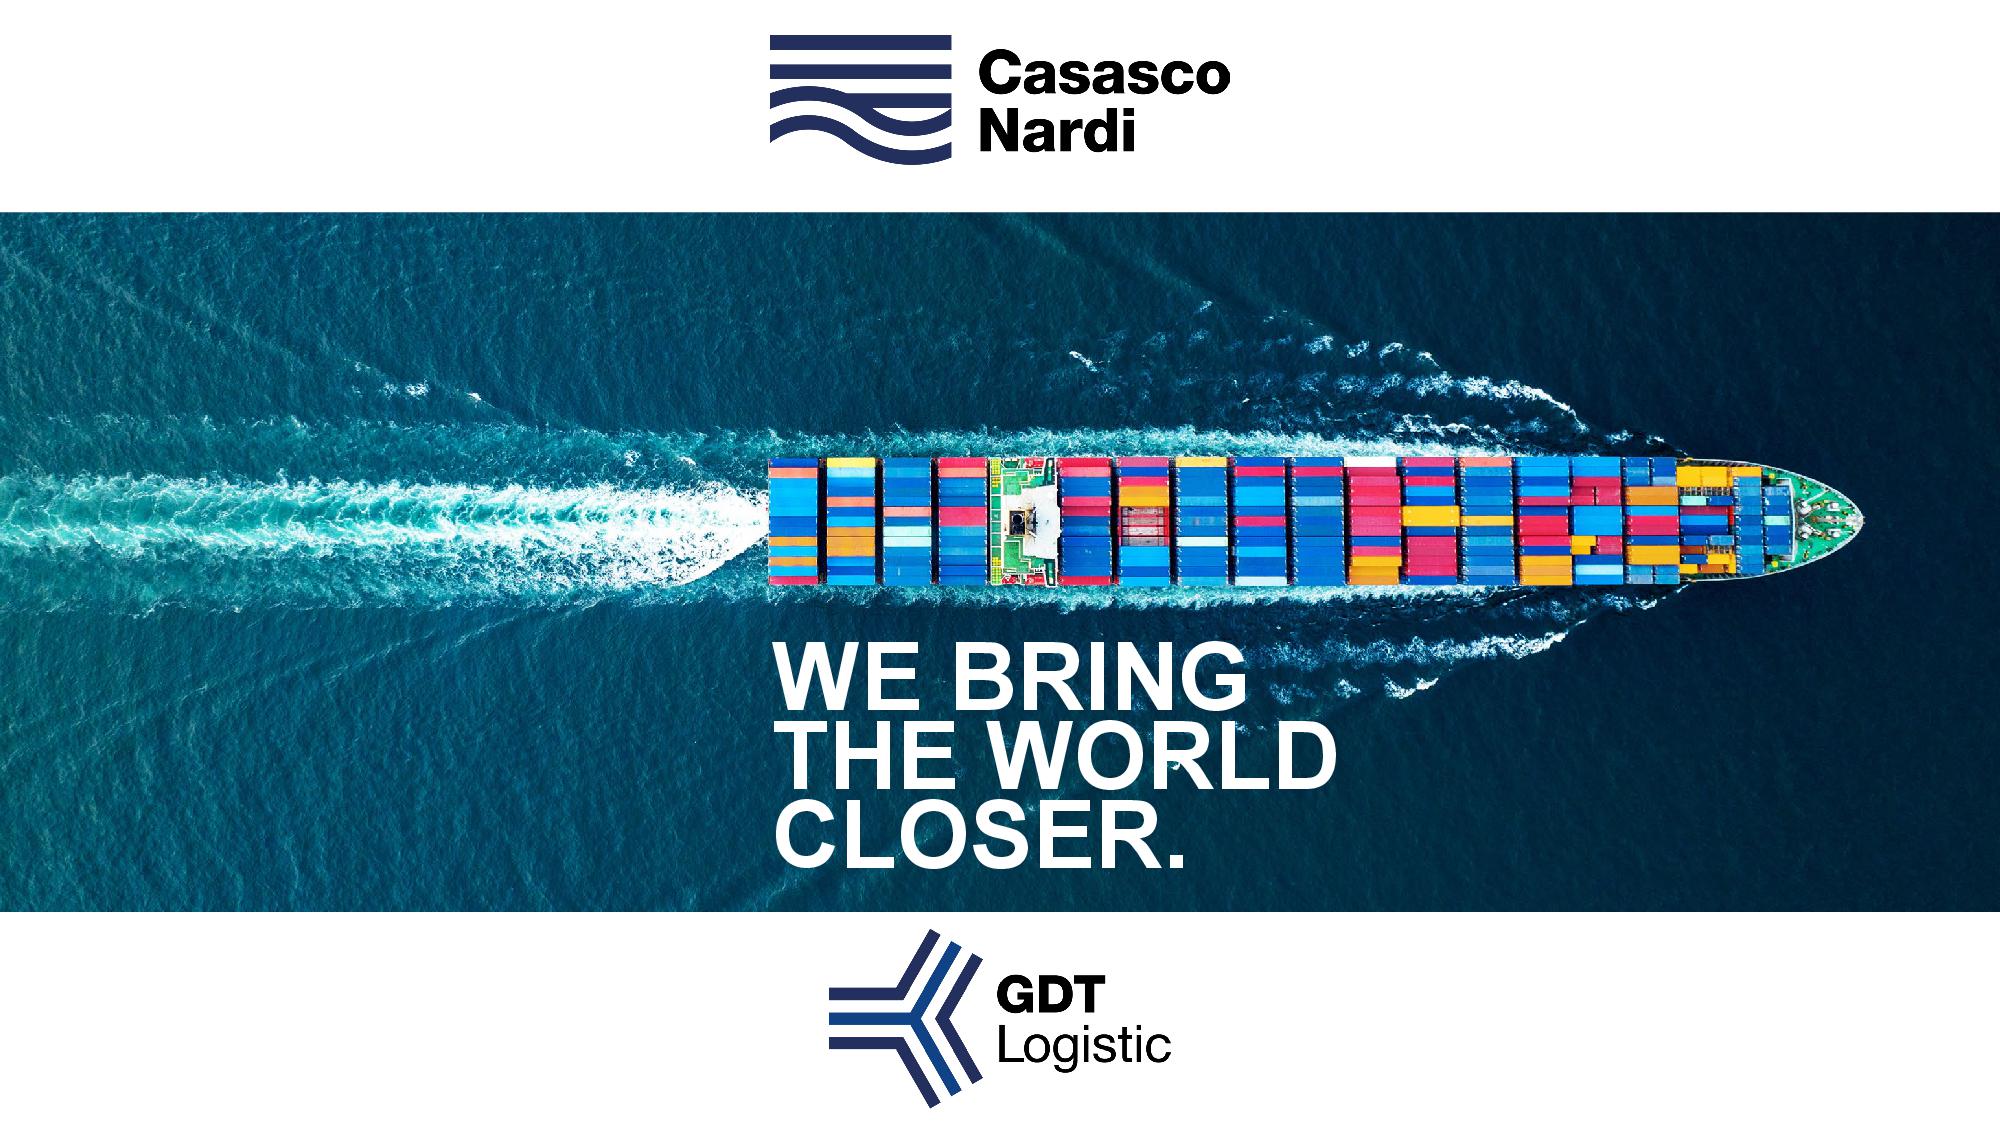 CasascoNardi has always been a firm point of reference in air and ocean forwarding